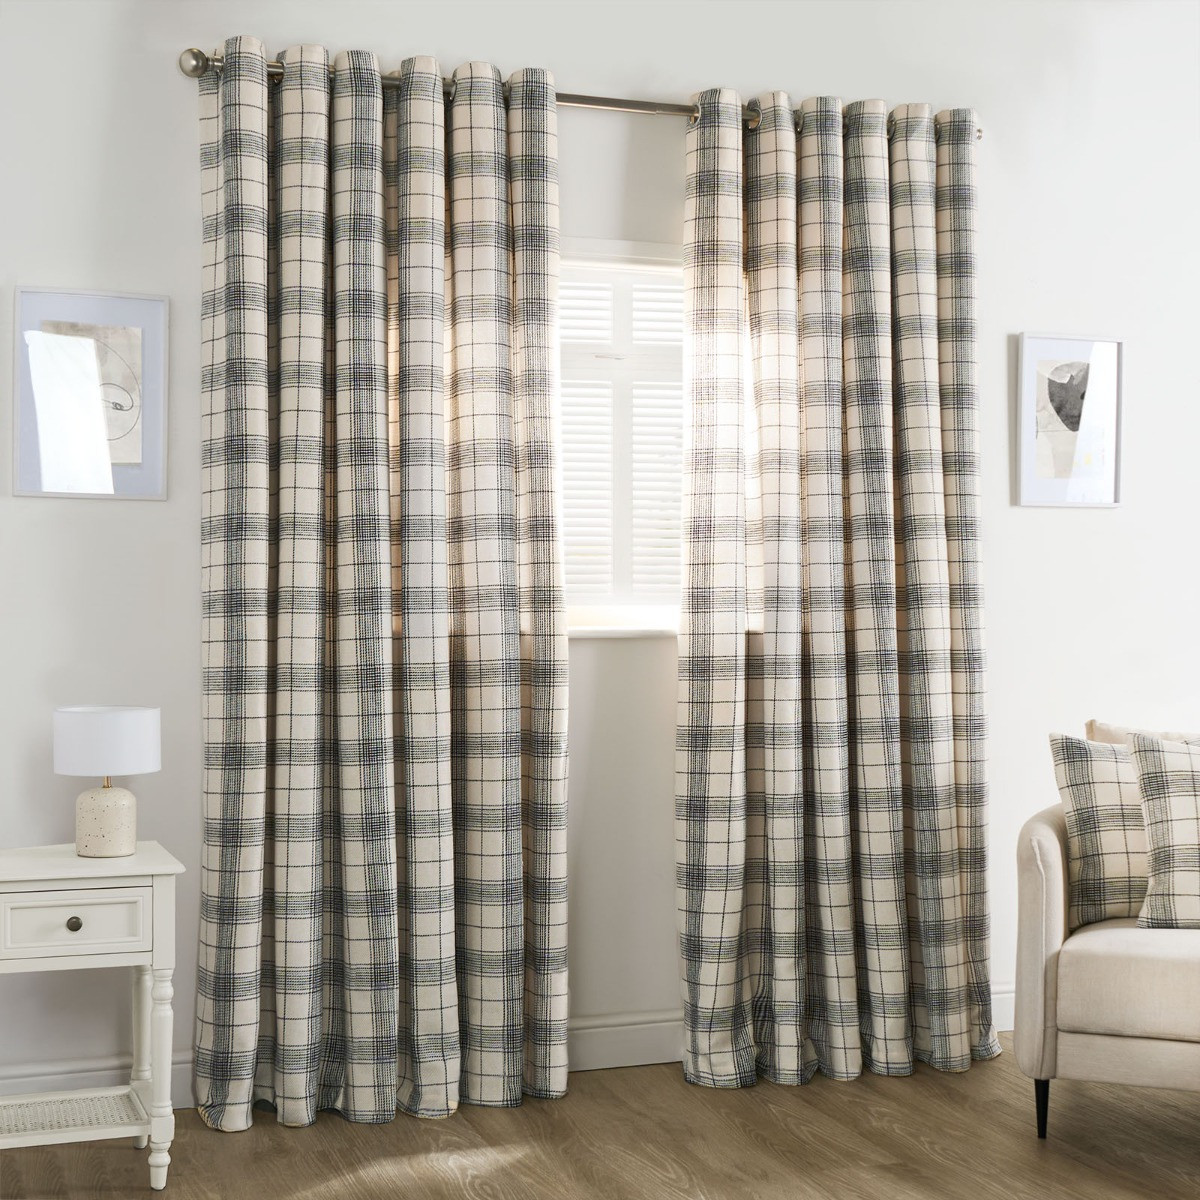 OHS Woven Check Eyelet Curtains - Cream>